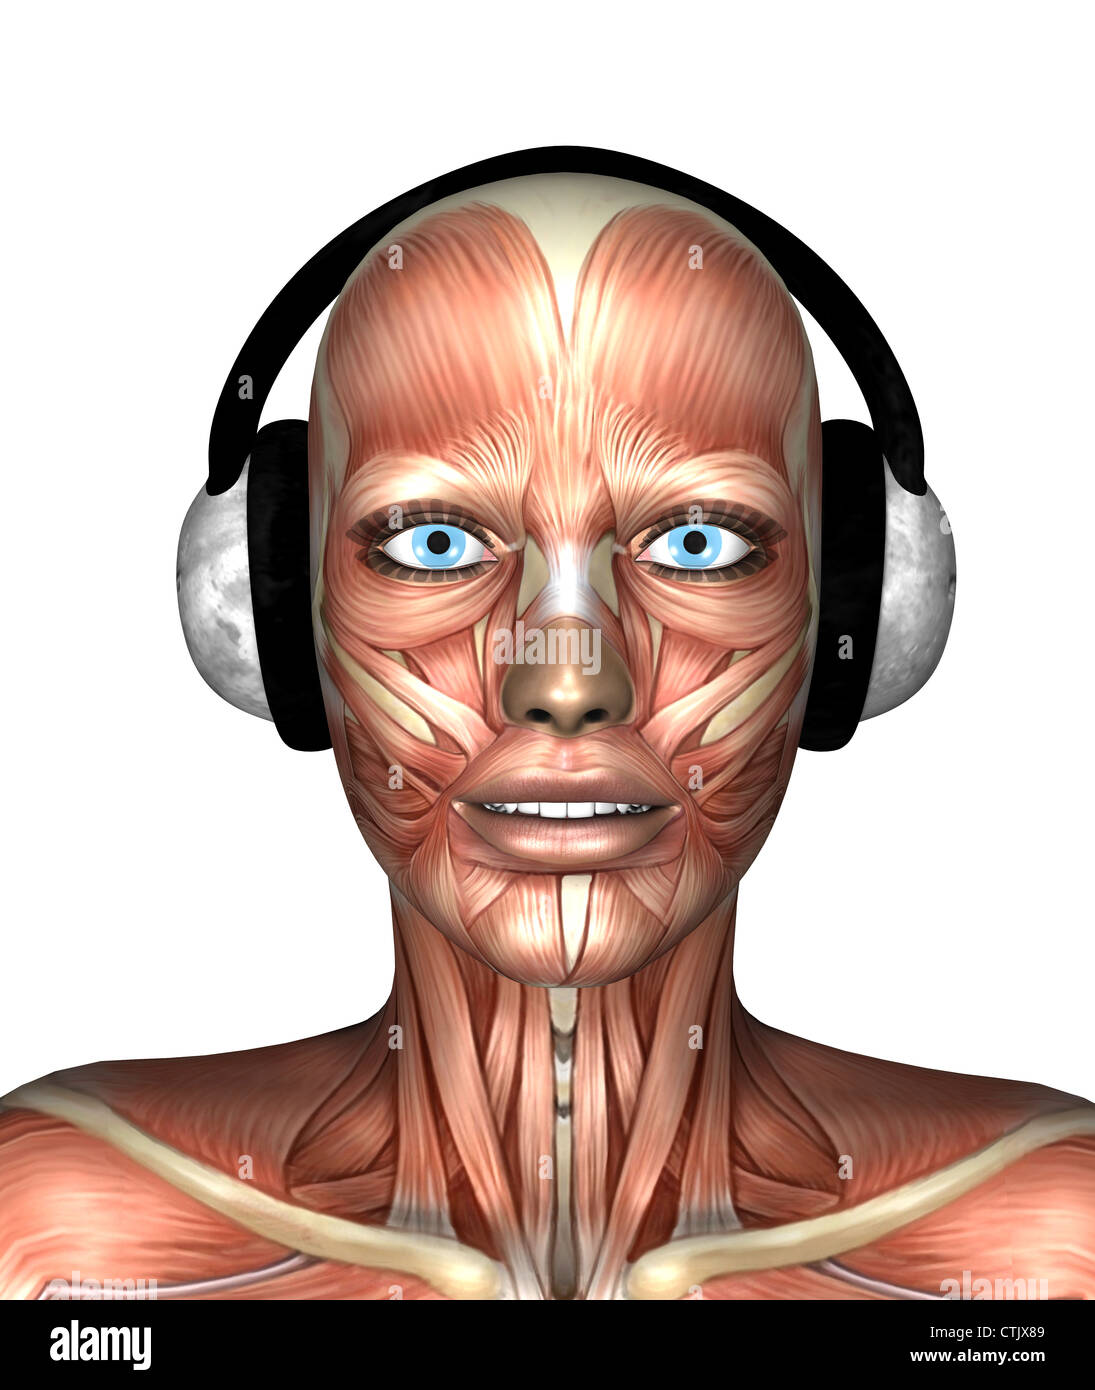 muscle woman with headphones Stock Photo